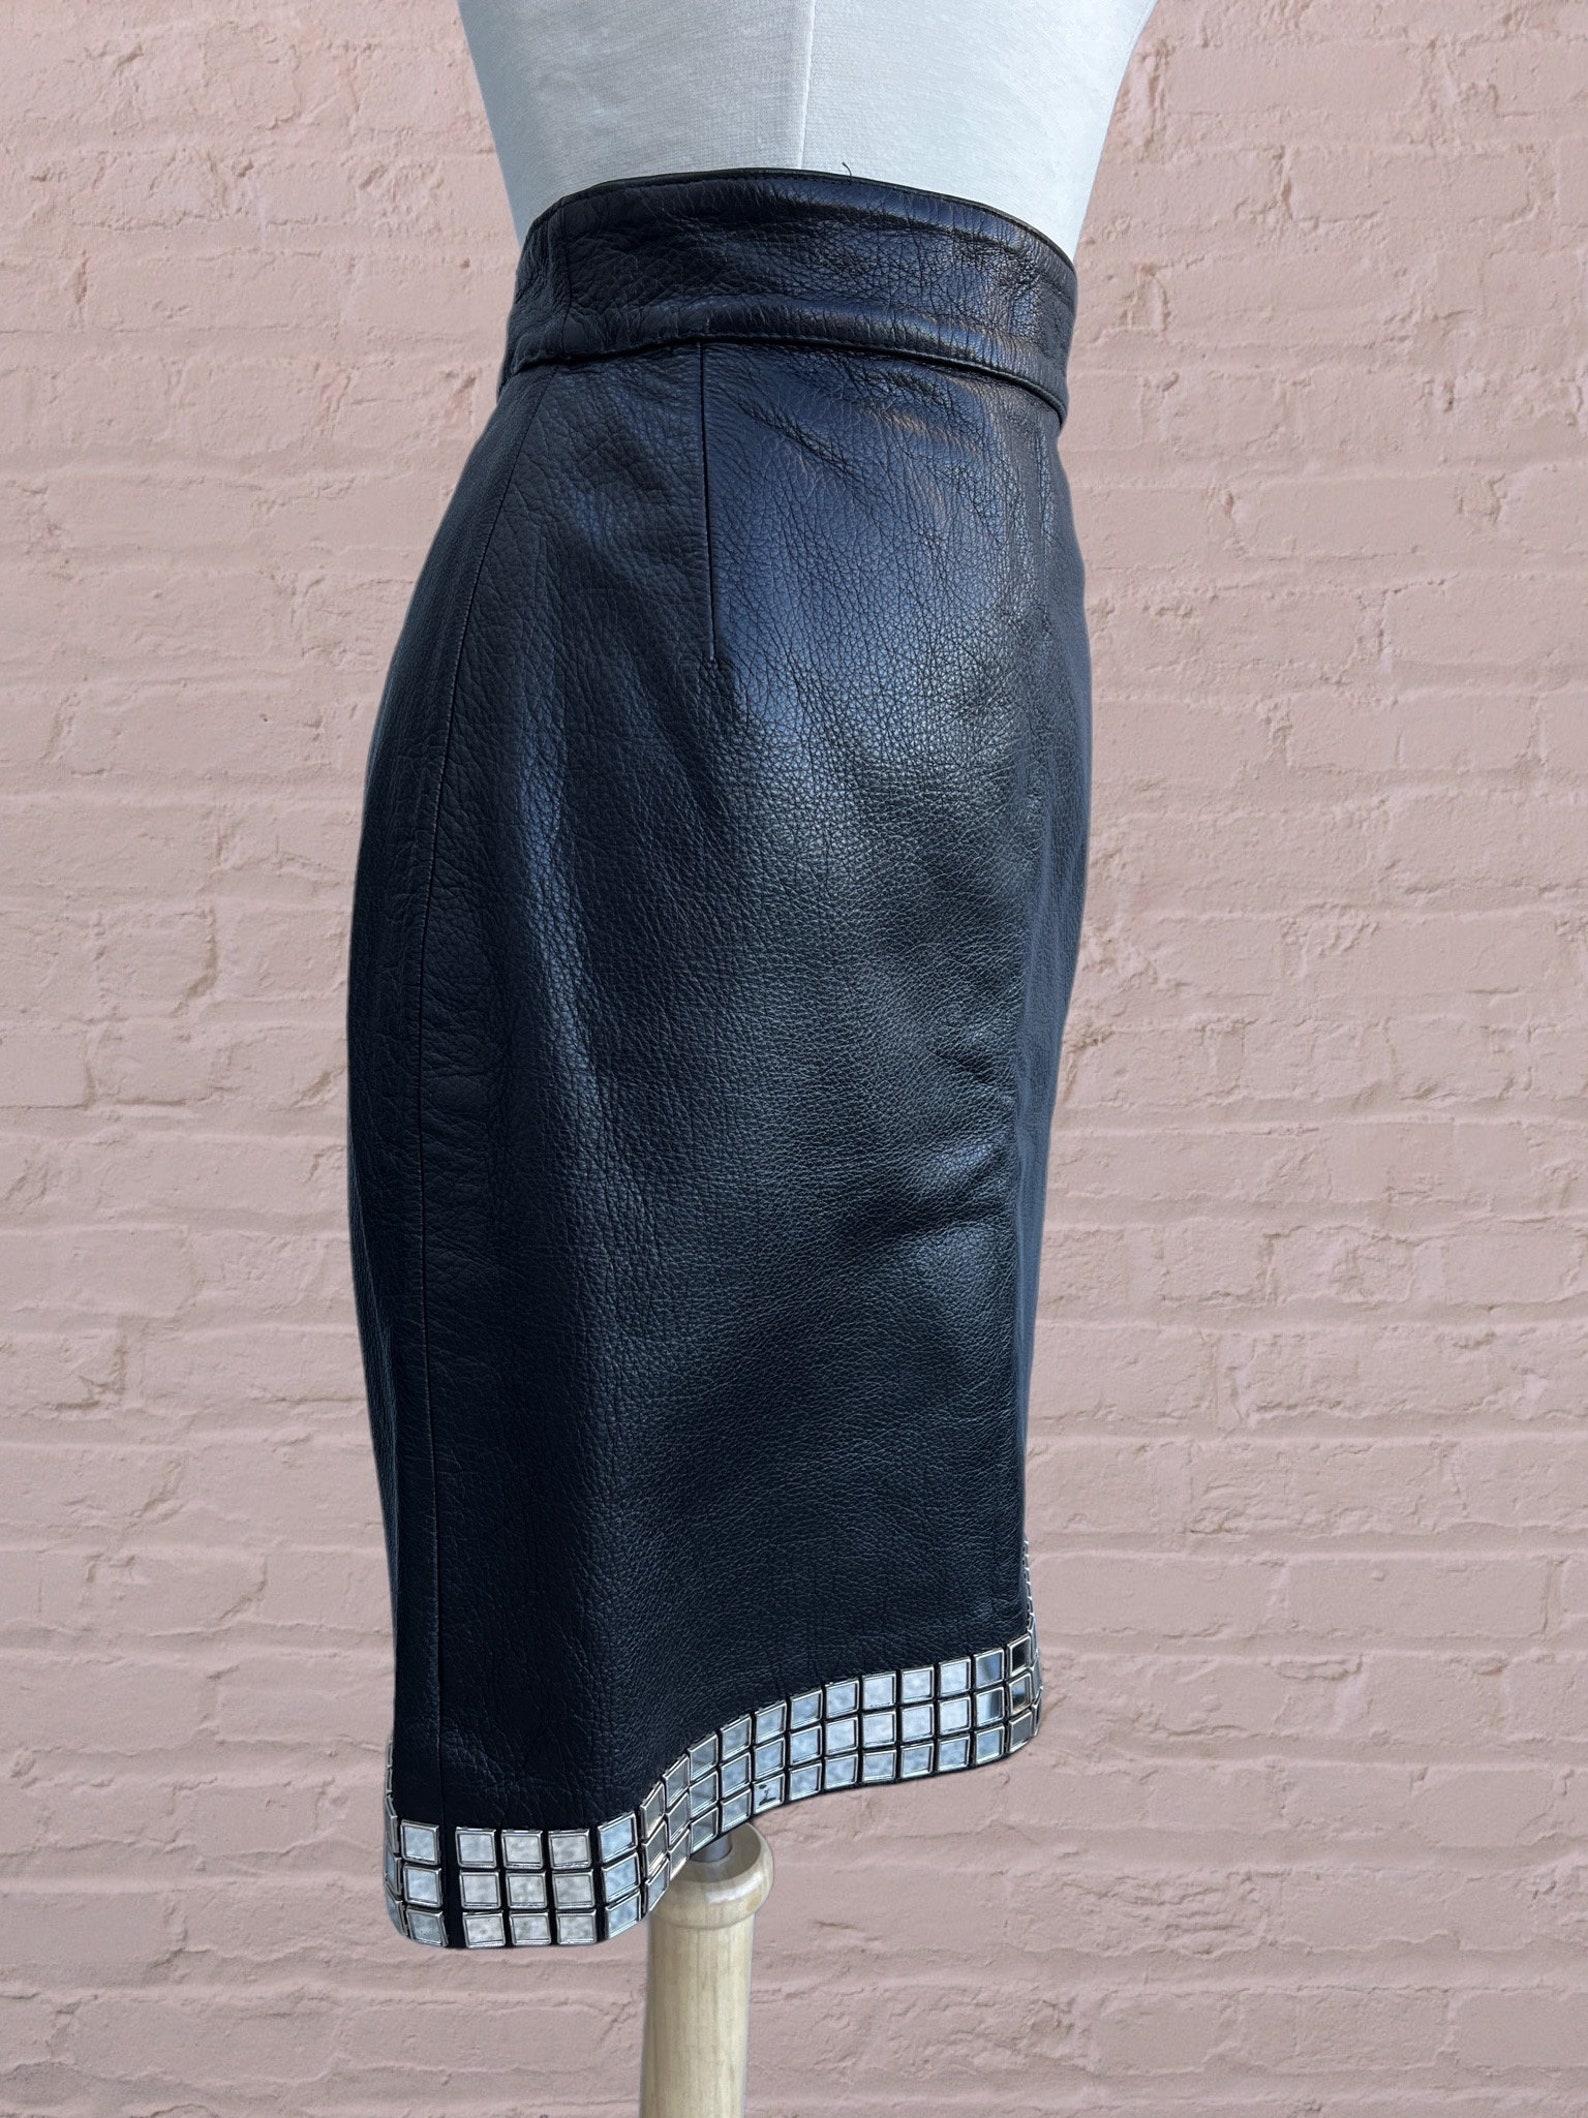 Moschino Black Leather Mirror Skirt, Circa 1990 In Good Condition For Sale In Brooklyn, NY